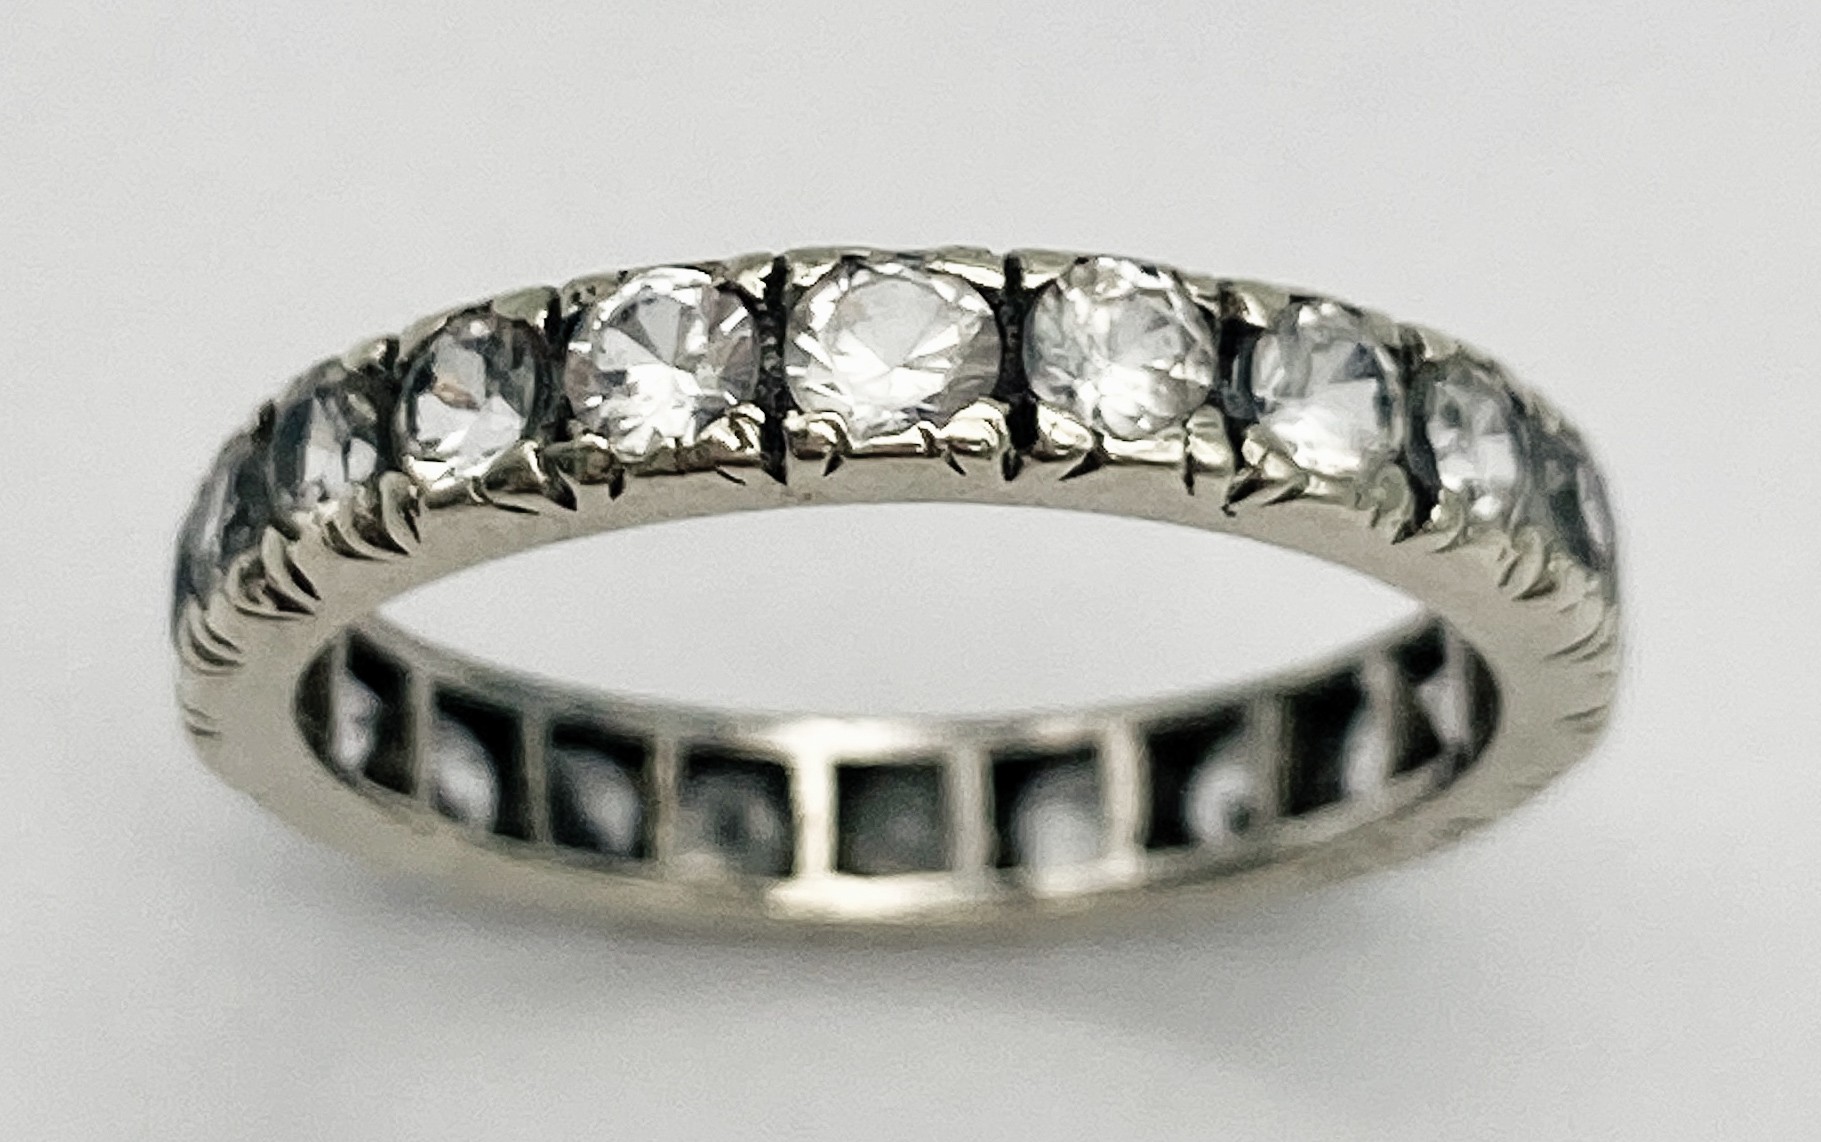 A VINTAGE 9K WHITE GOLD (TESTED) WHITE STONE FULL ETERNITY RING. 2.5G. SIZE 0. - Image 2 of 6